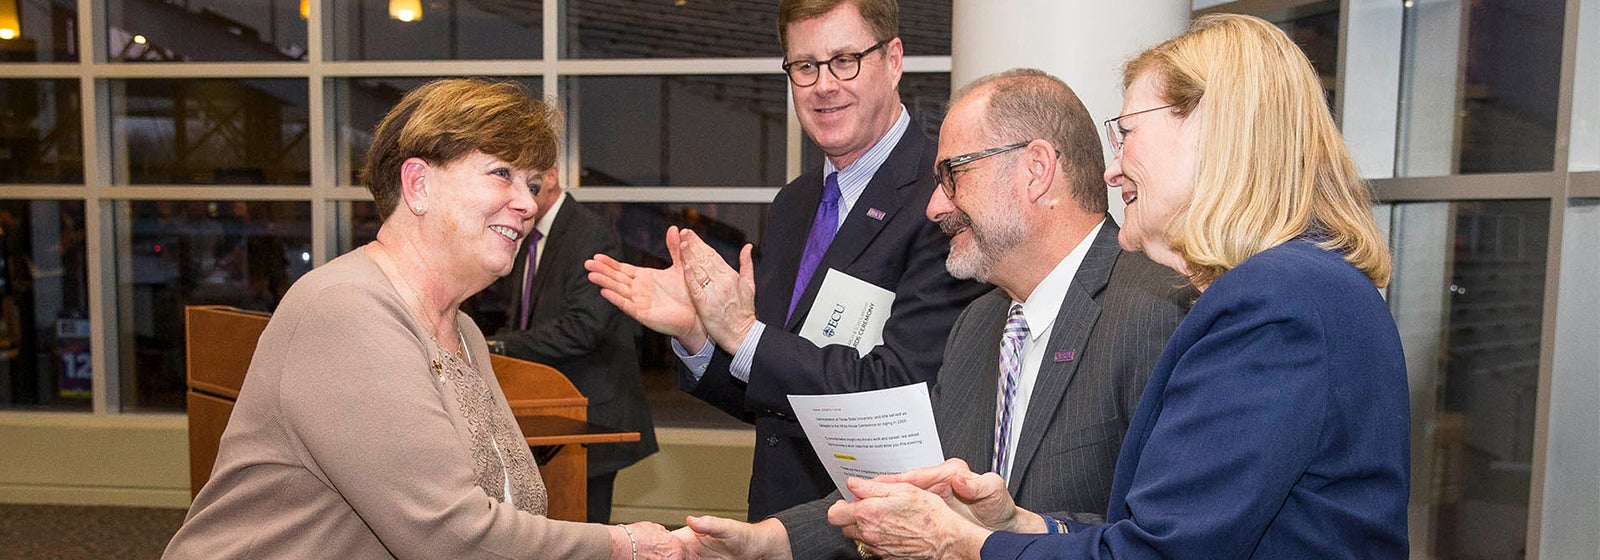 Anne Dickerson (left) is congratulated by ECU Chancellor Cecil Staton (from center), Provost Ron Mitchelson and Vice Chancellor Phyllis Horns after receiving the Lifetime Research and Creative Activity Award. (Photos by Cliff Hollis)